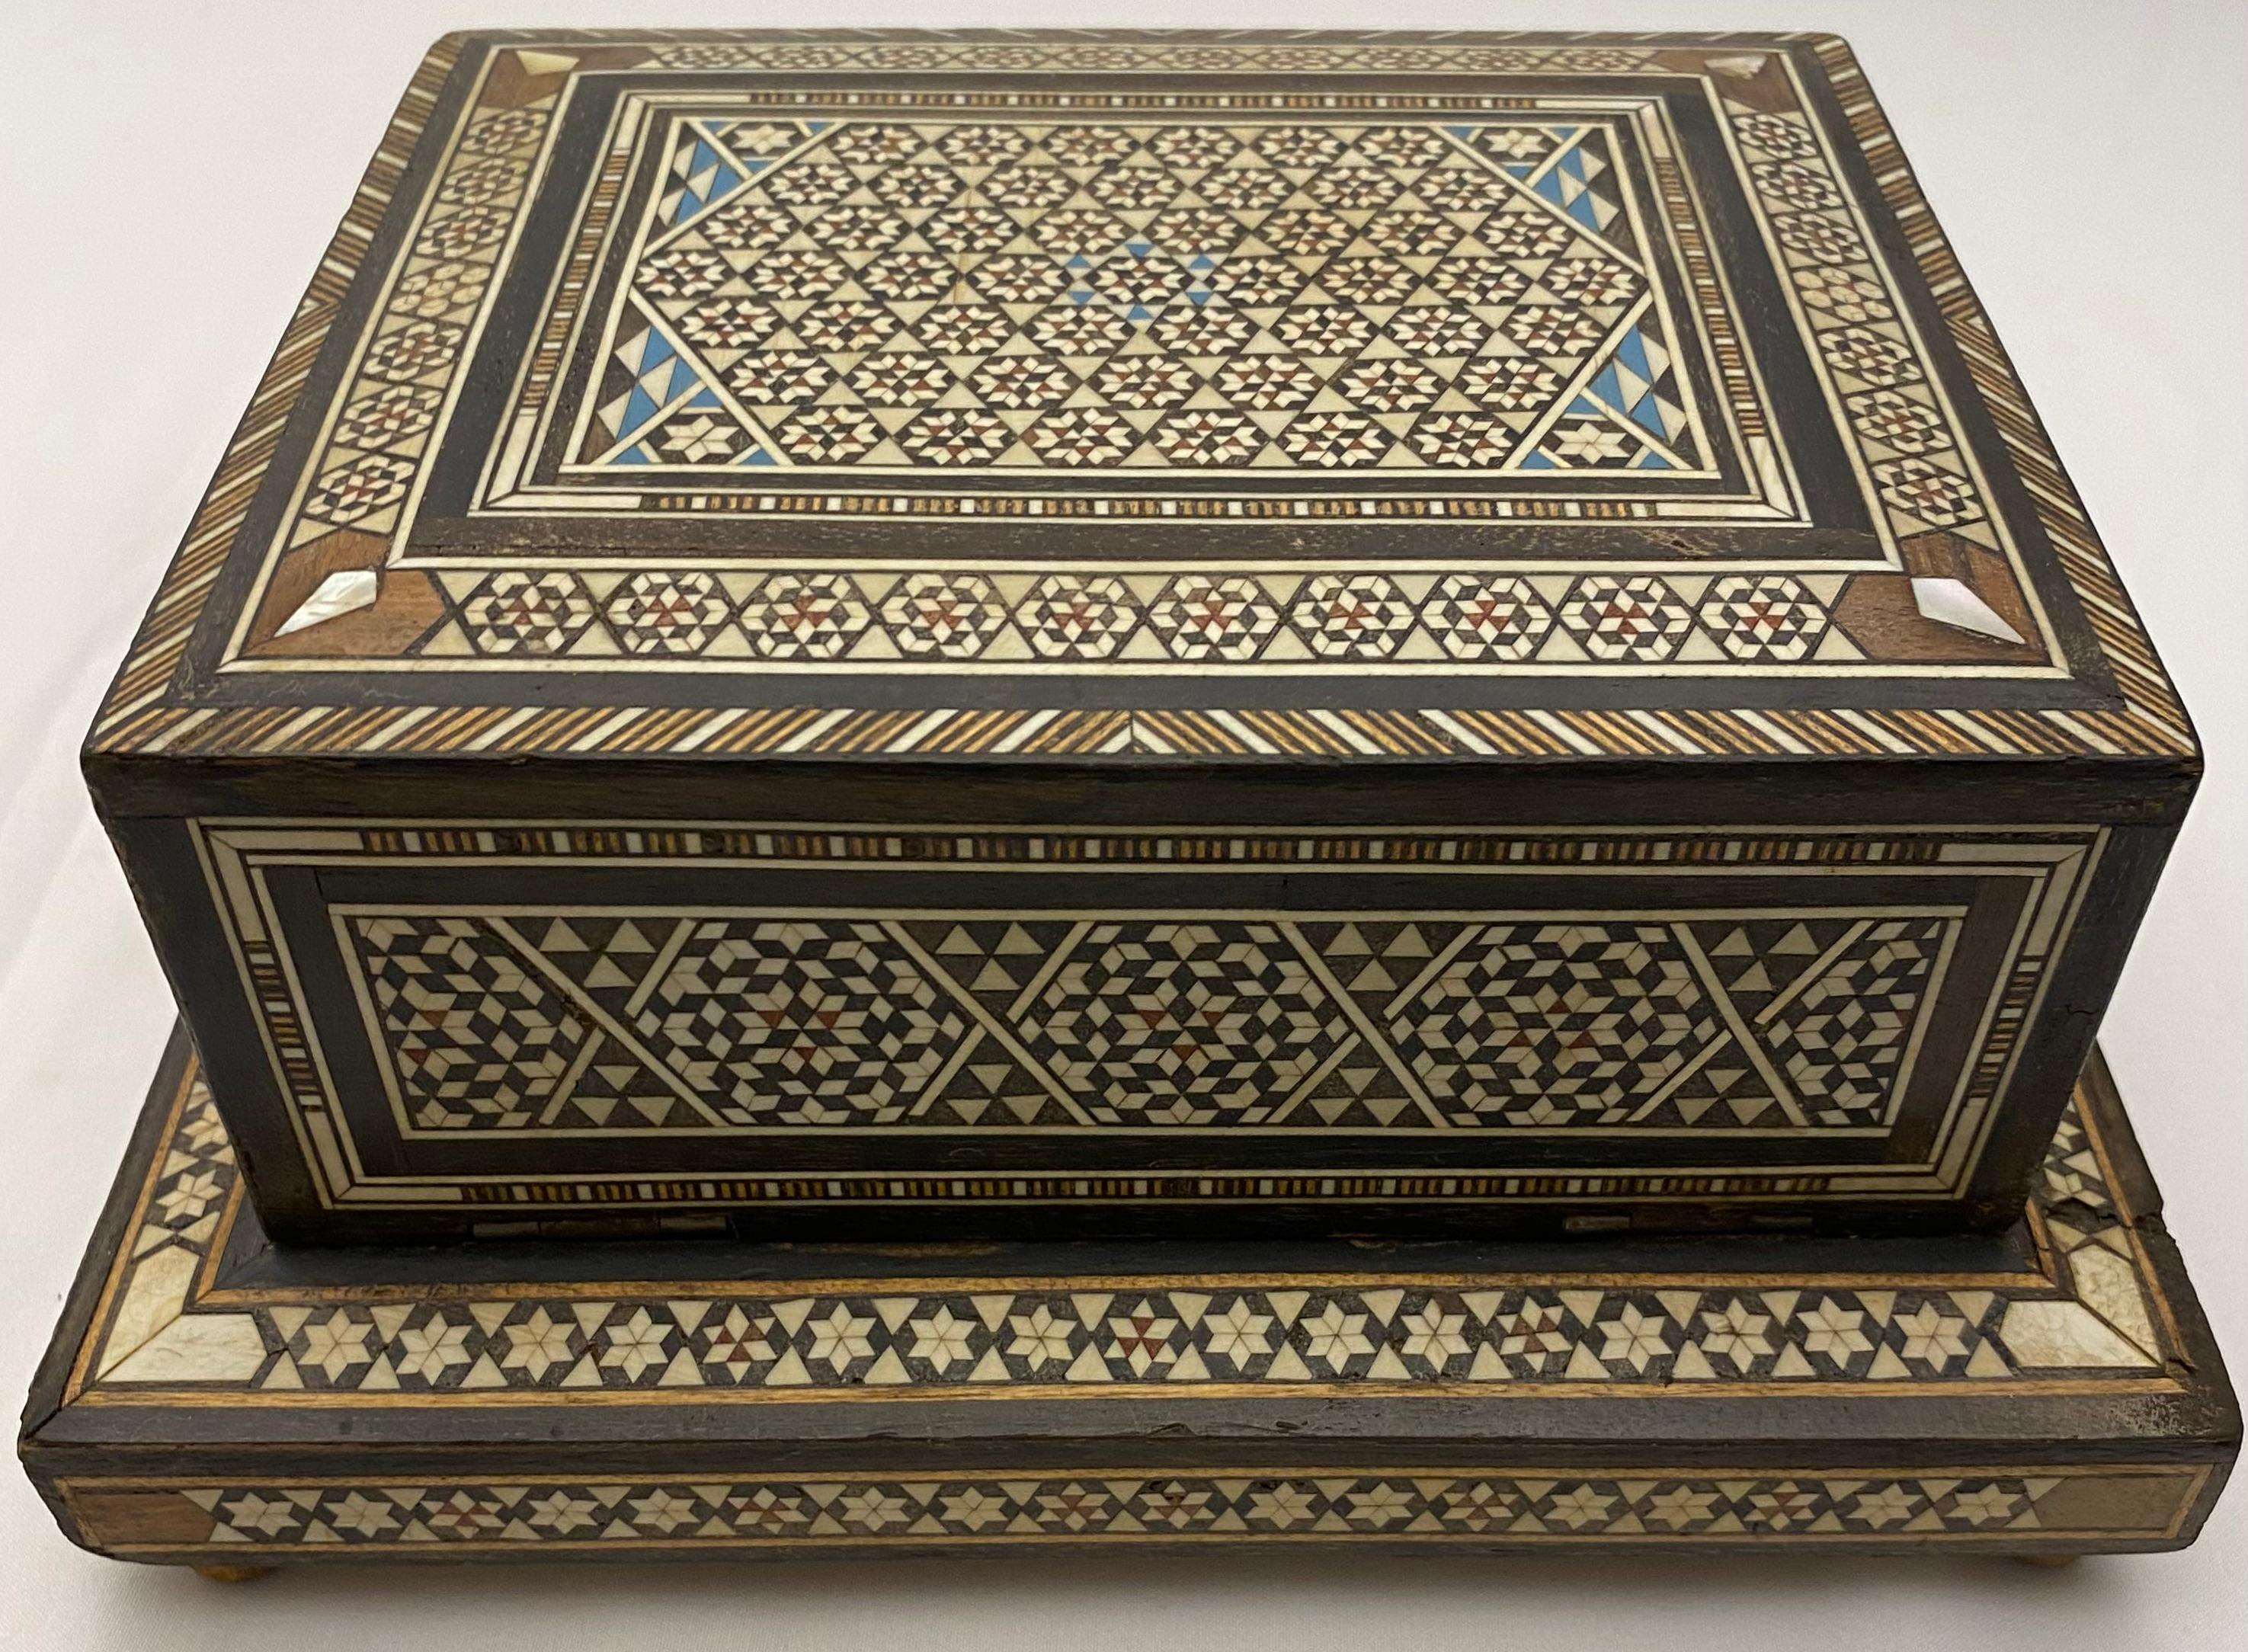 Vintage Moorish style cigarette music box inlaid with mother of pearl and ebony. Handcrafted using very fine Moorish micro mosaic inlaid geometric marquetry artwork.

This box was traditionally used to store cigarettes and play music when you open